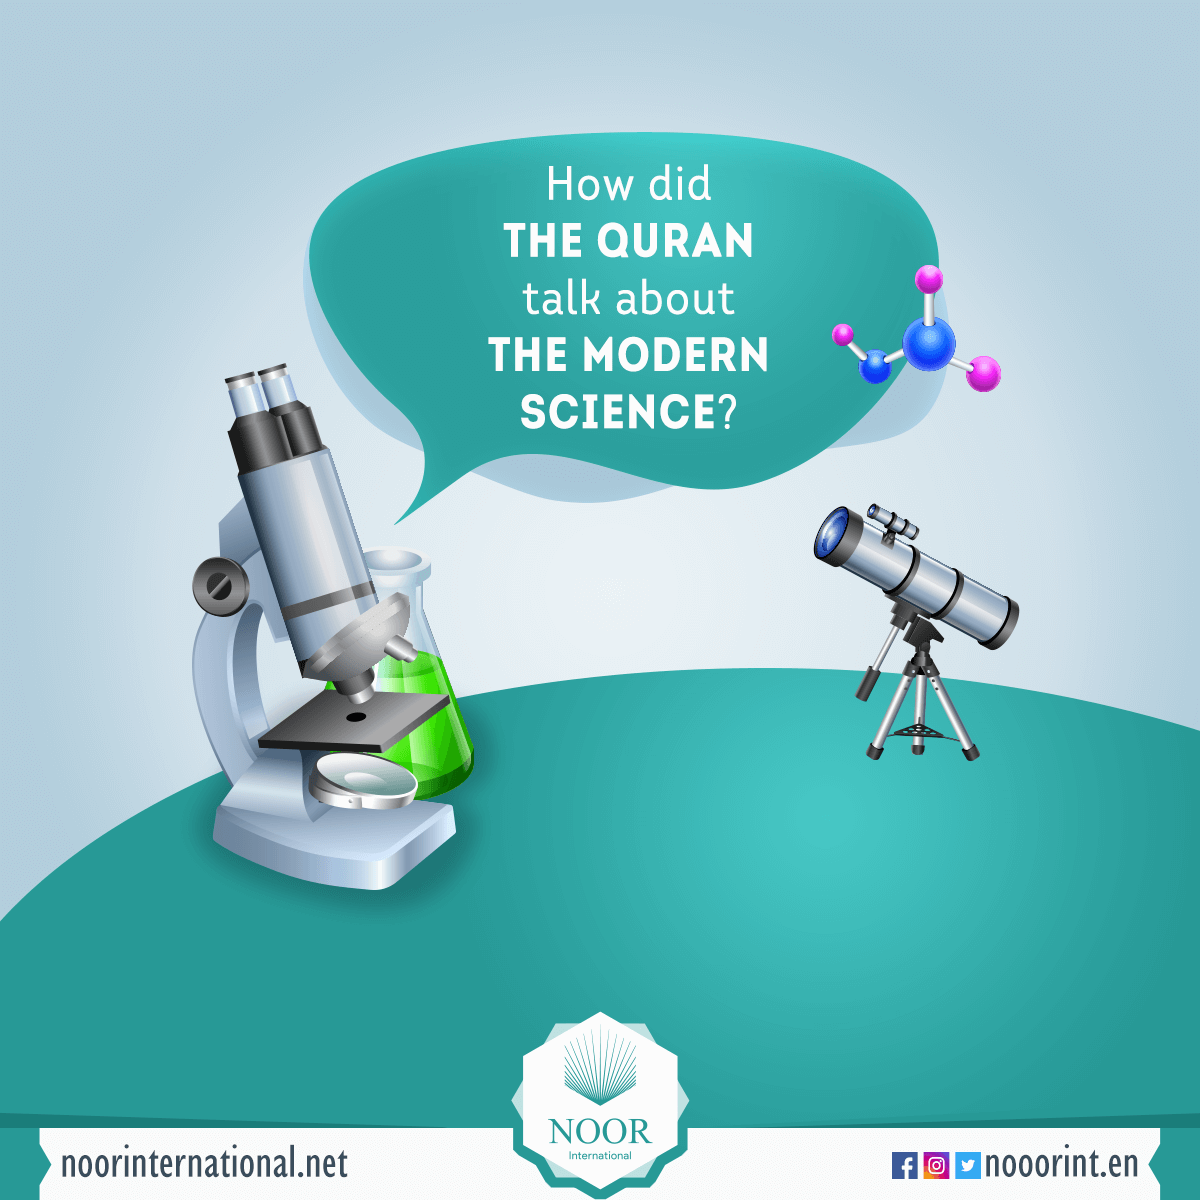 How did the Quran talk about the modern science?